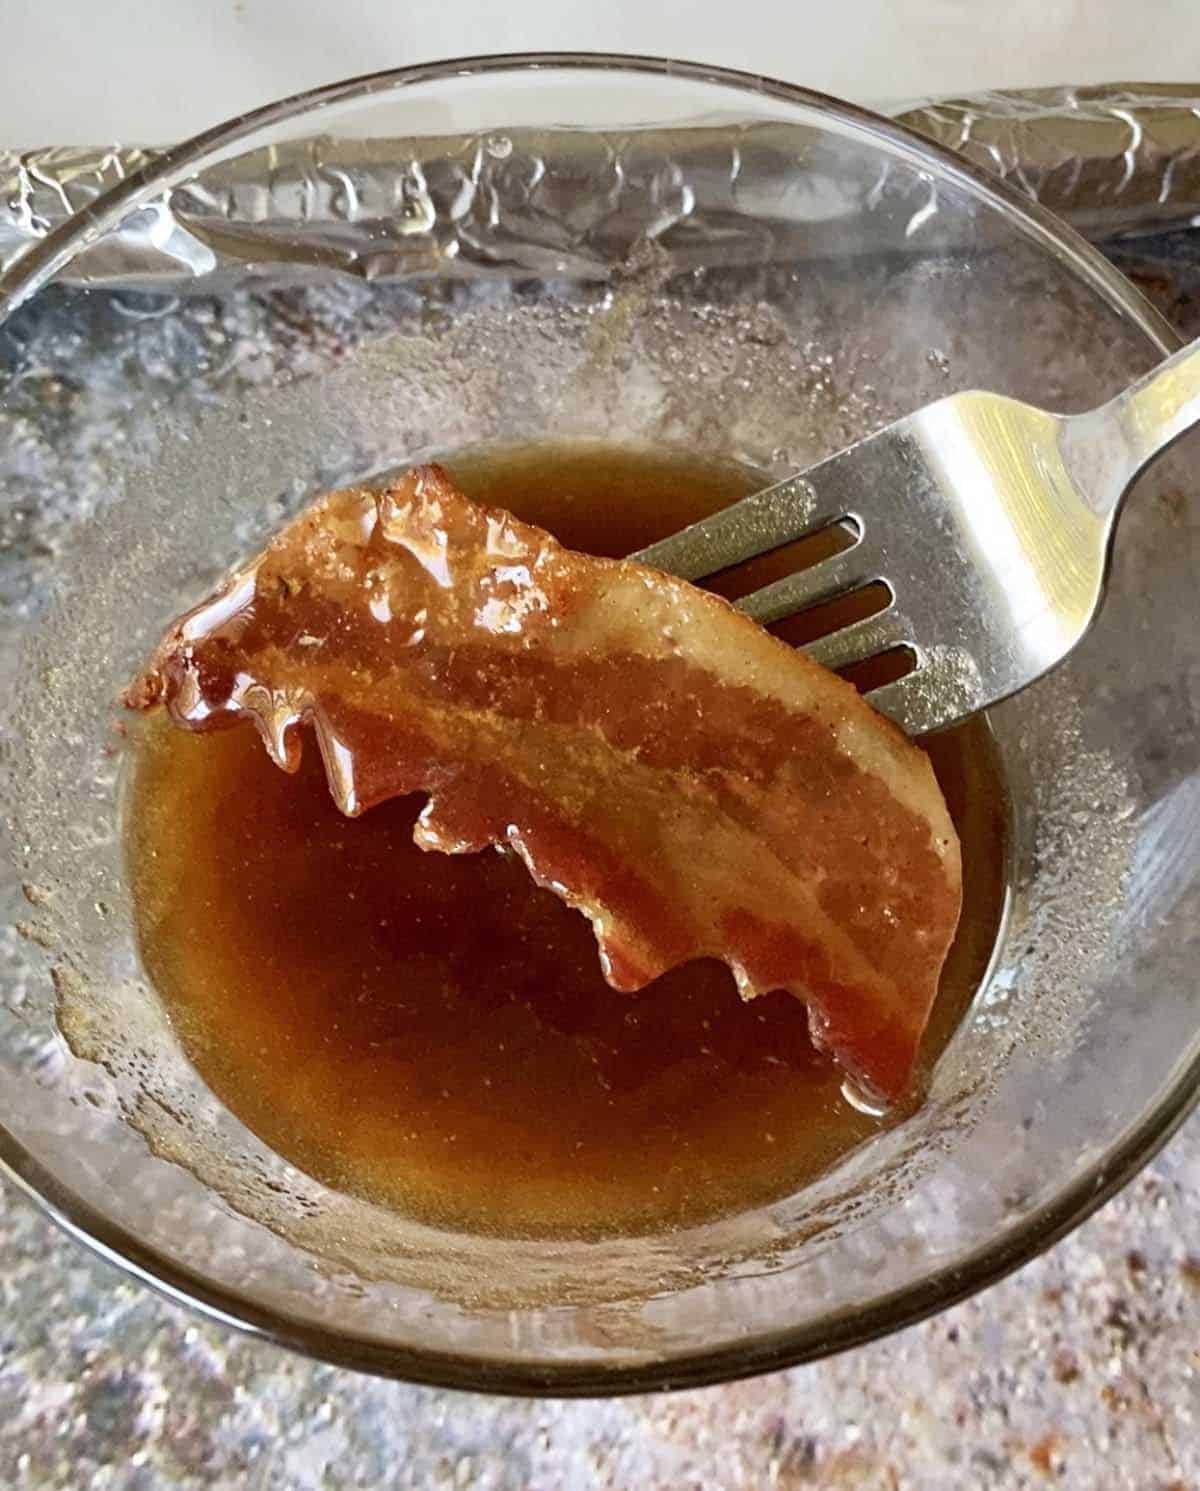 A fork with a bat shaped piece of bacon dipping it in the brown sugar maple syrup glaze in a small glass bowl.